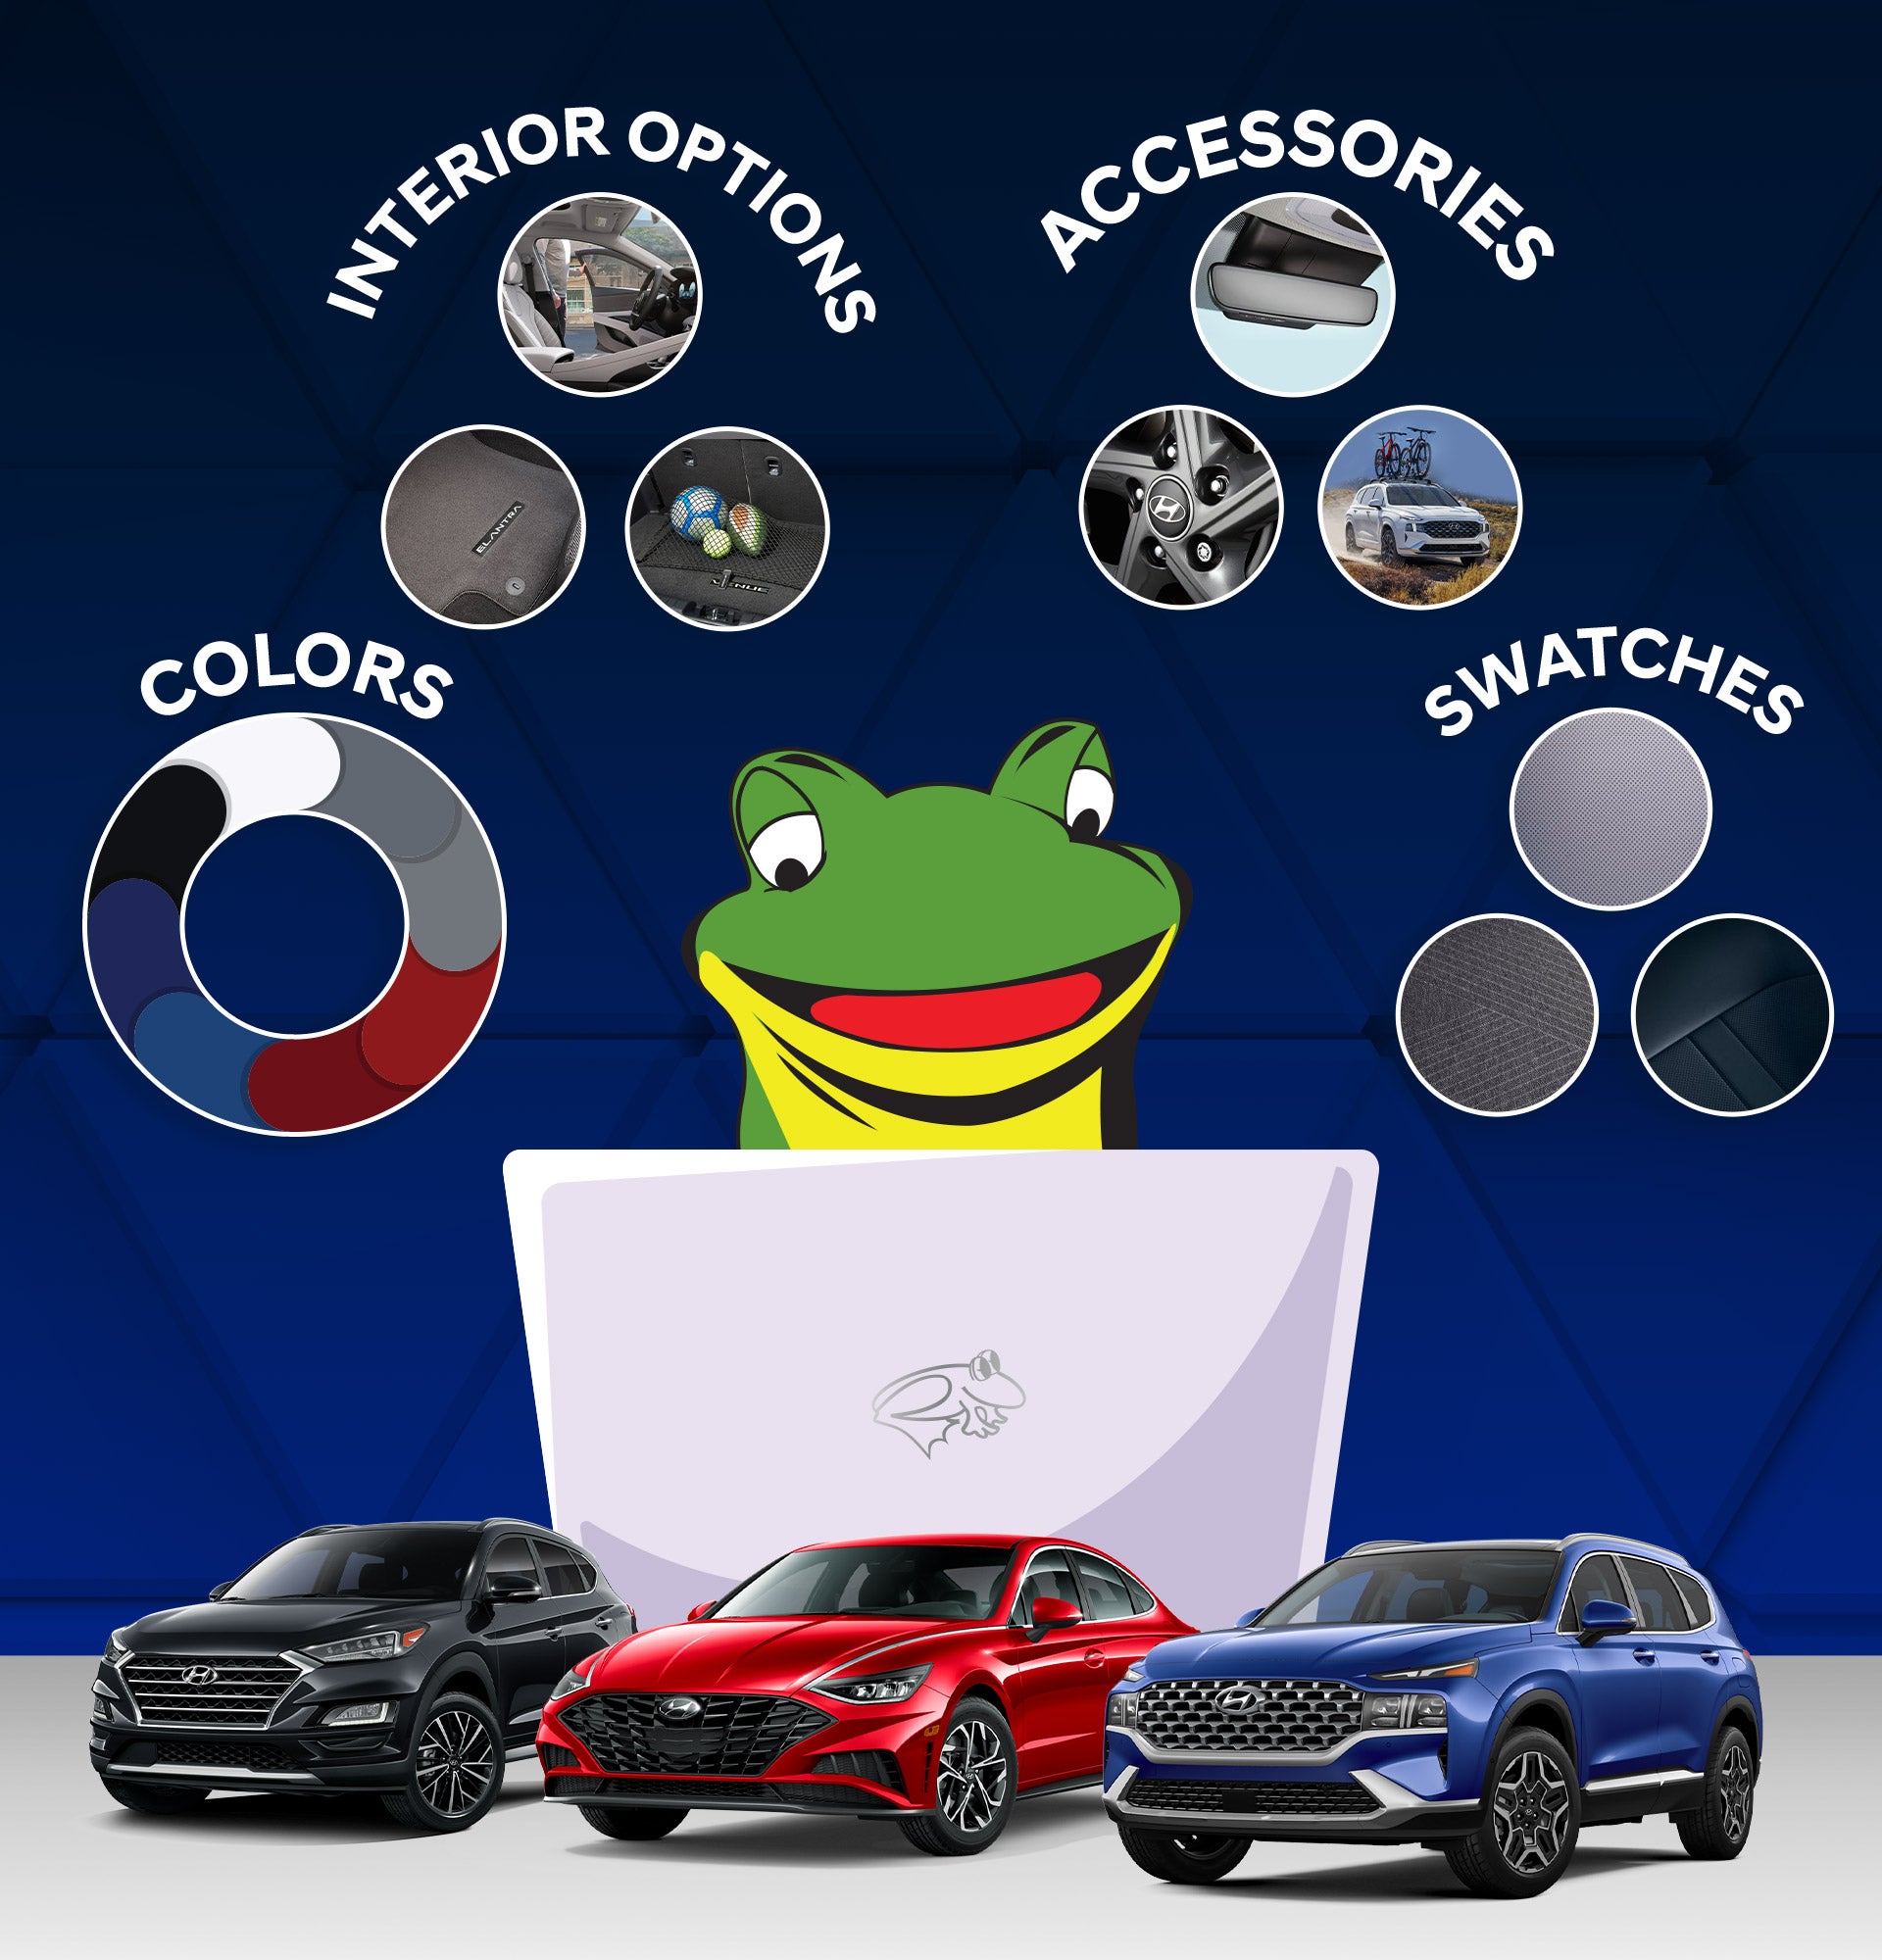 Build Your Own Hyundai, Vehicle Selector